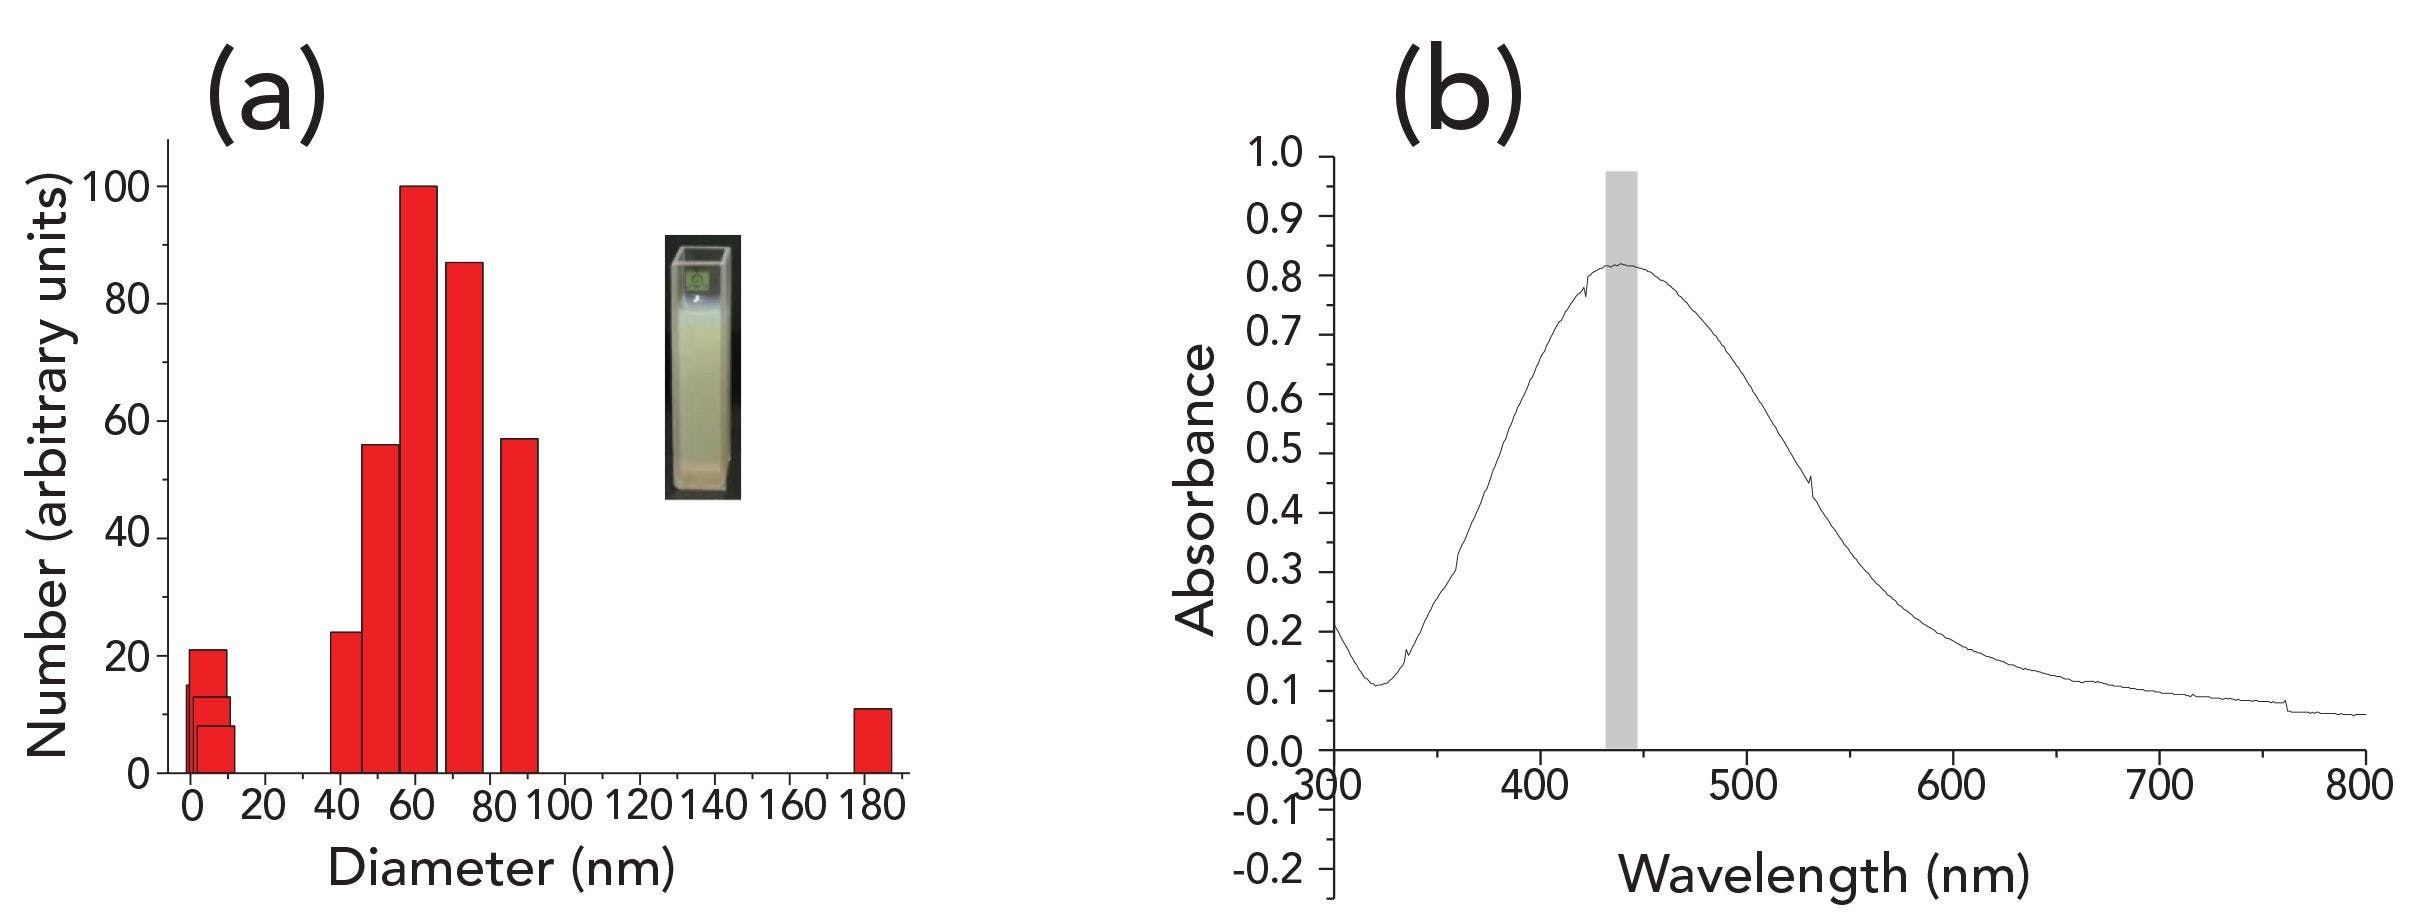 FIGURE 2: (a) Particle size distribution of silver sol; (b) UV-vis extinction spectra of silver sol.